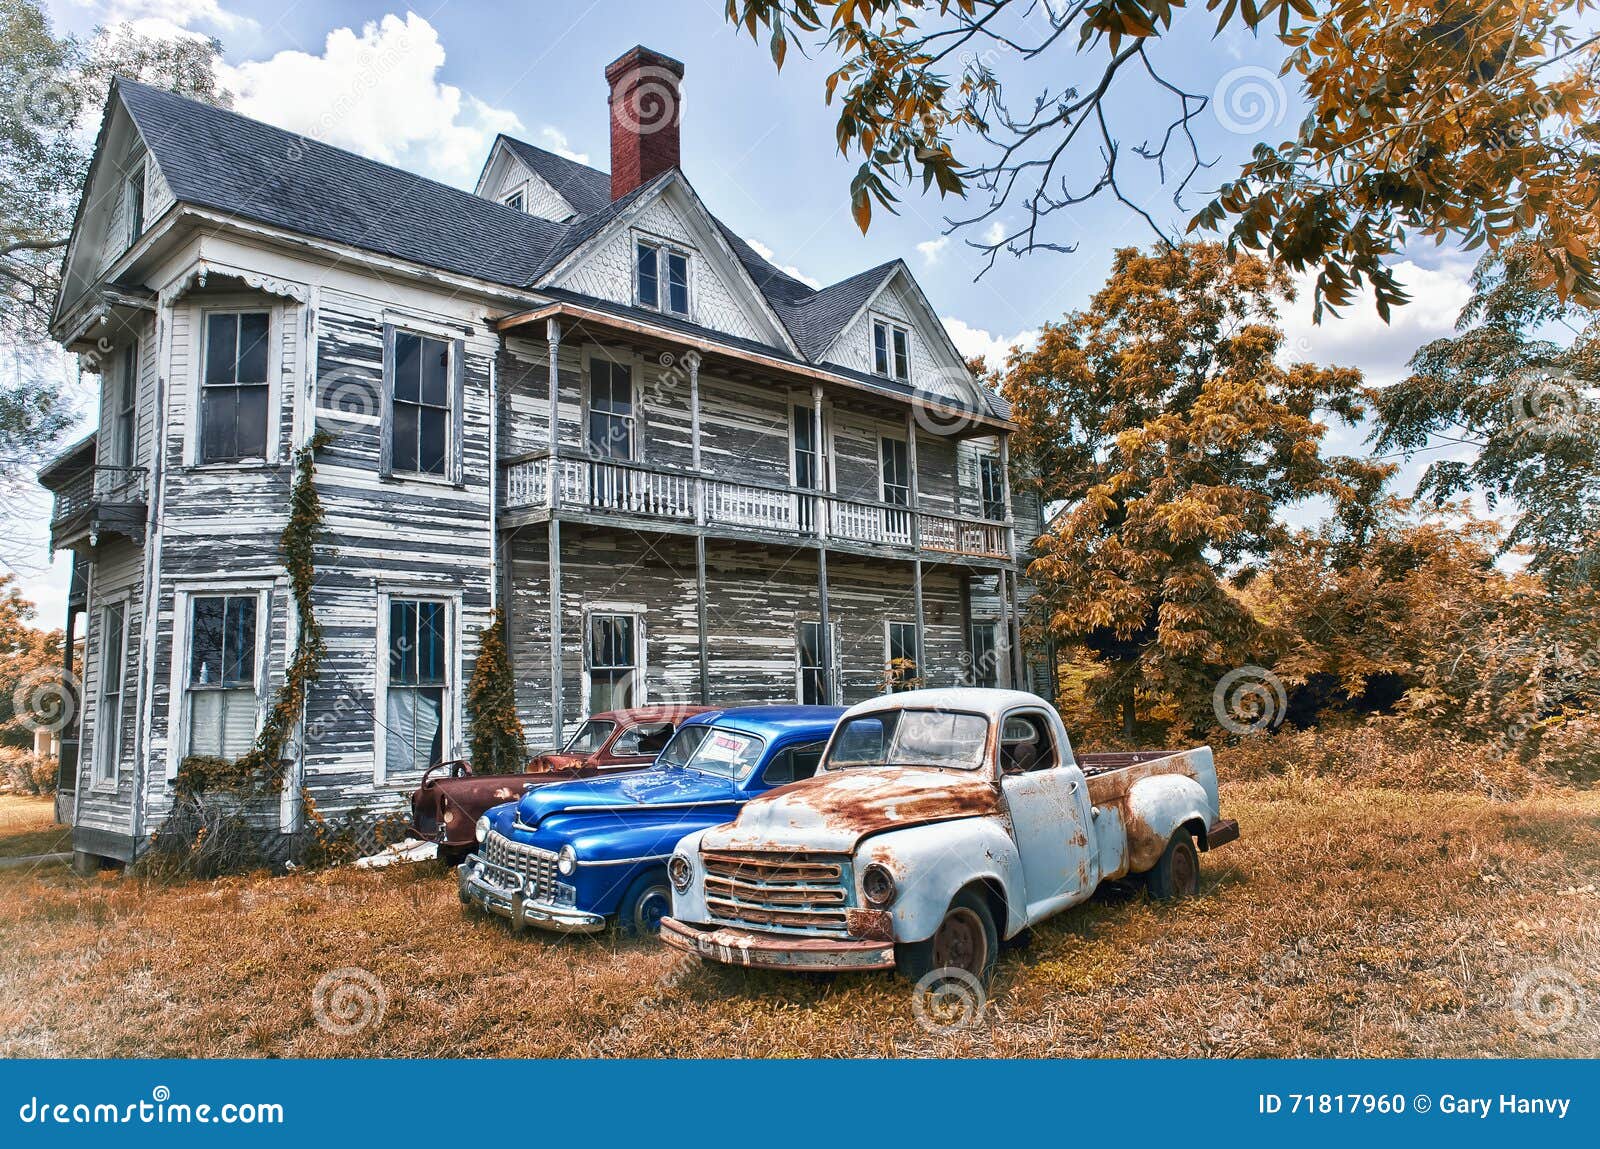 abandoned two story farmhouse with three vintage automobiles